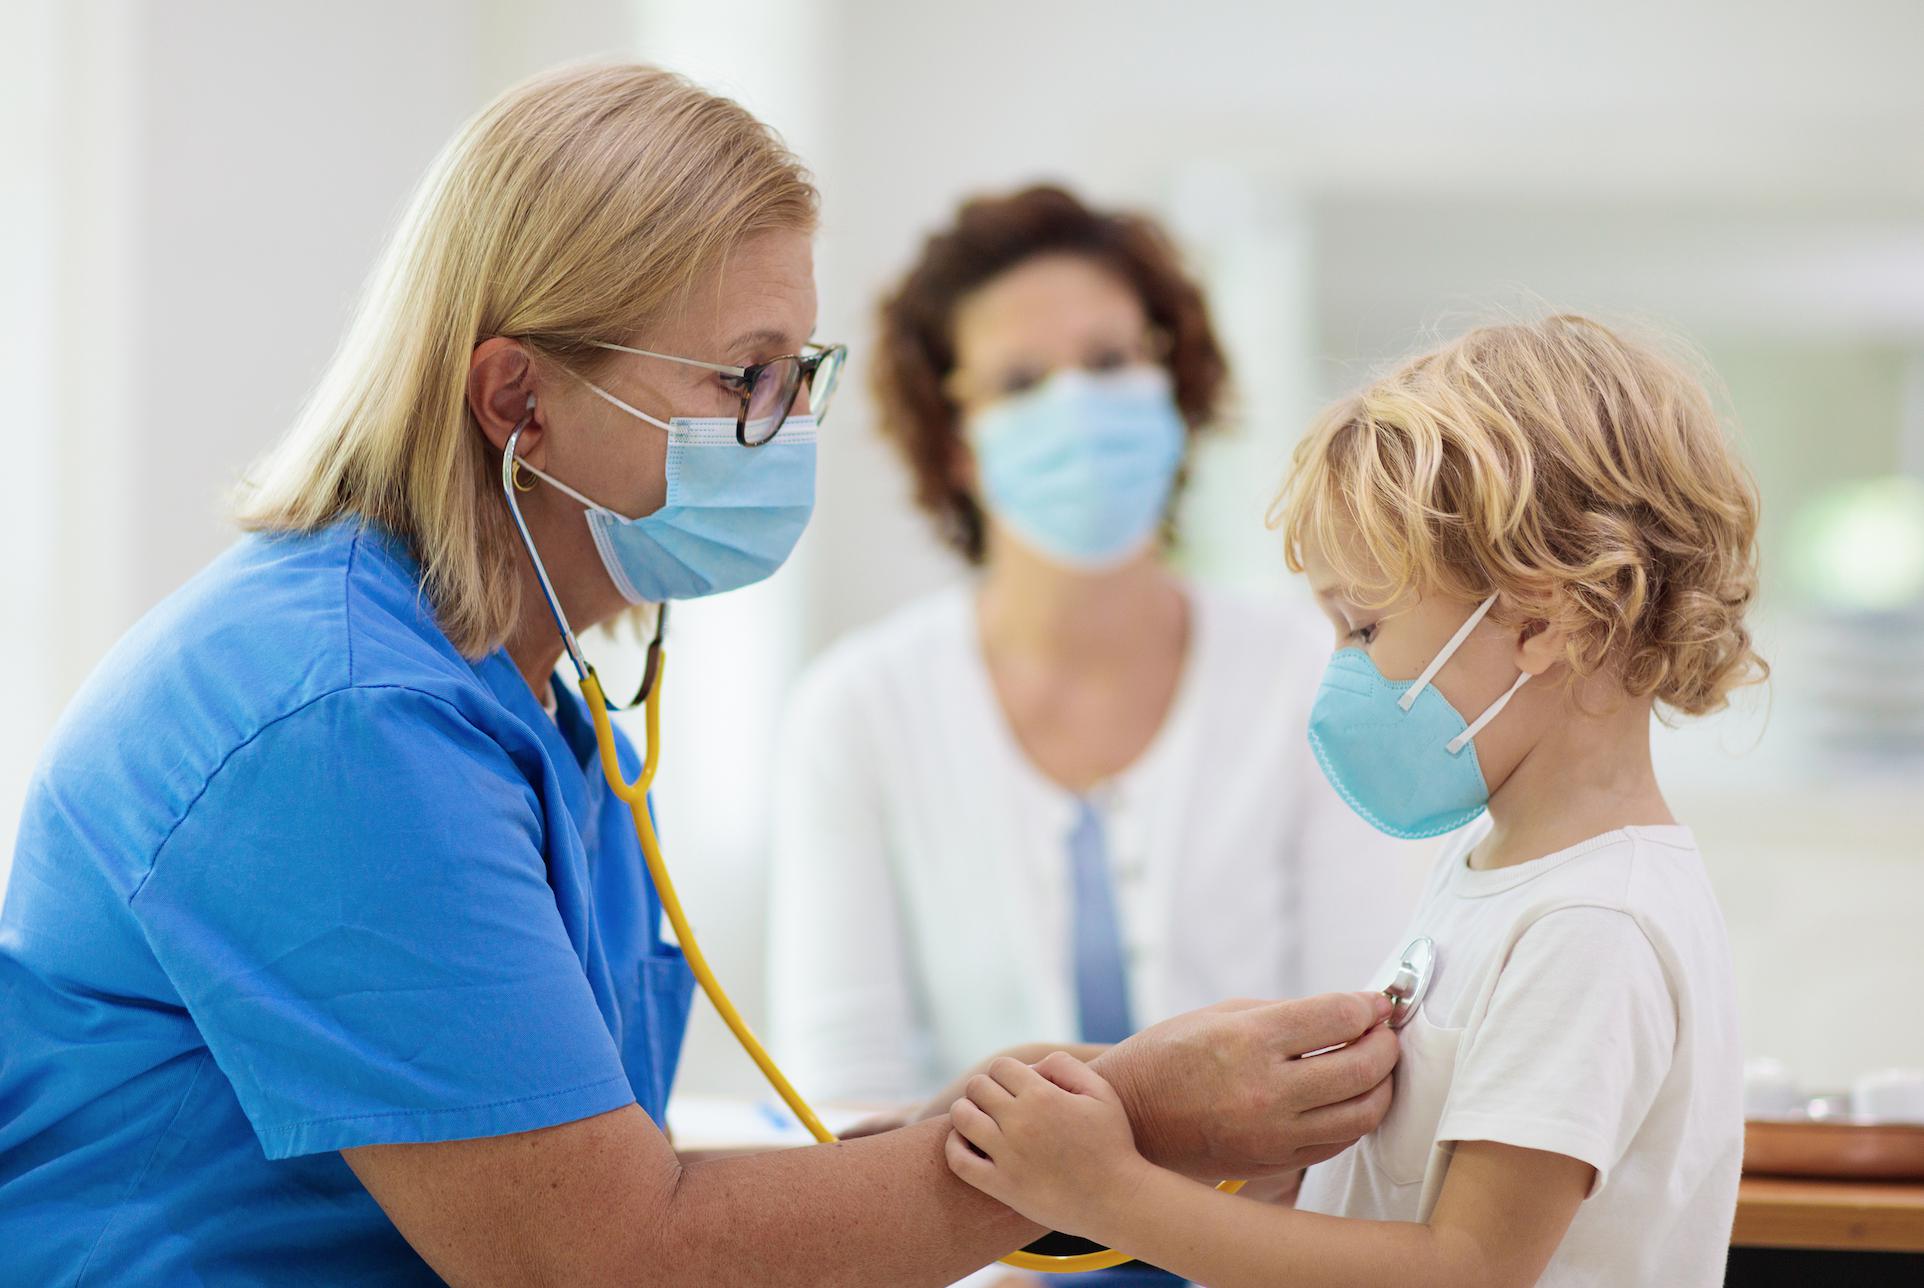 Pediatricians want kids to be part of COVID-19 vaccine trials